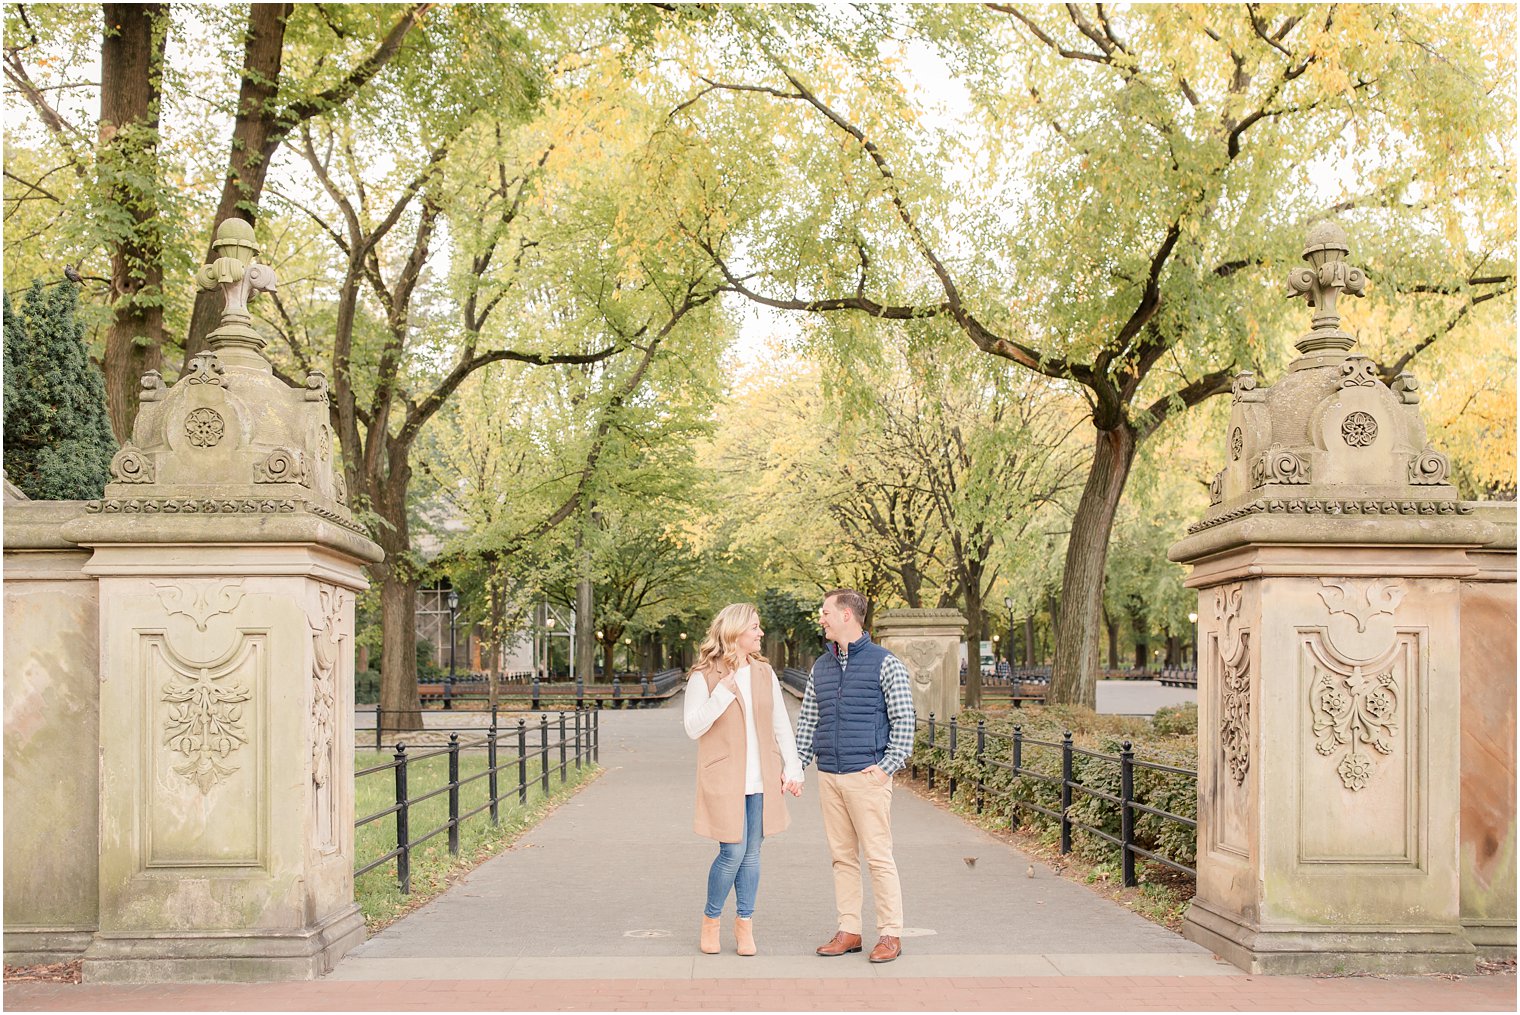 Elegant NYC engagement photo in Central Park